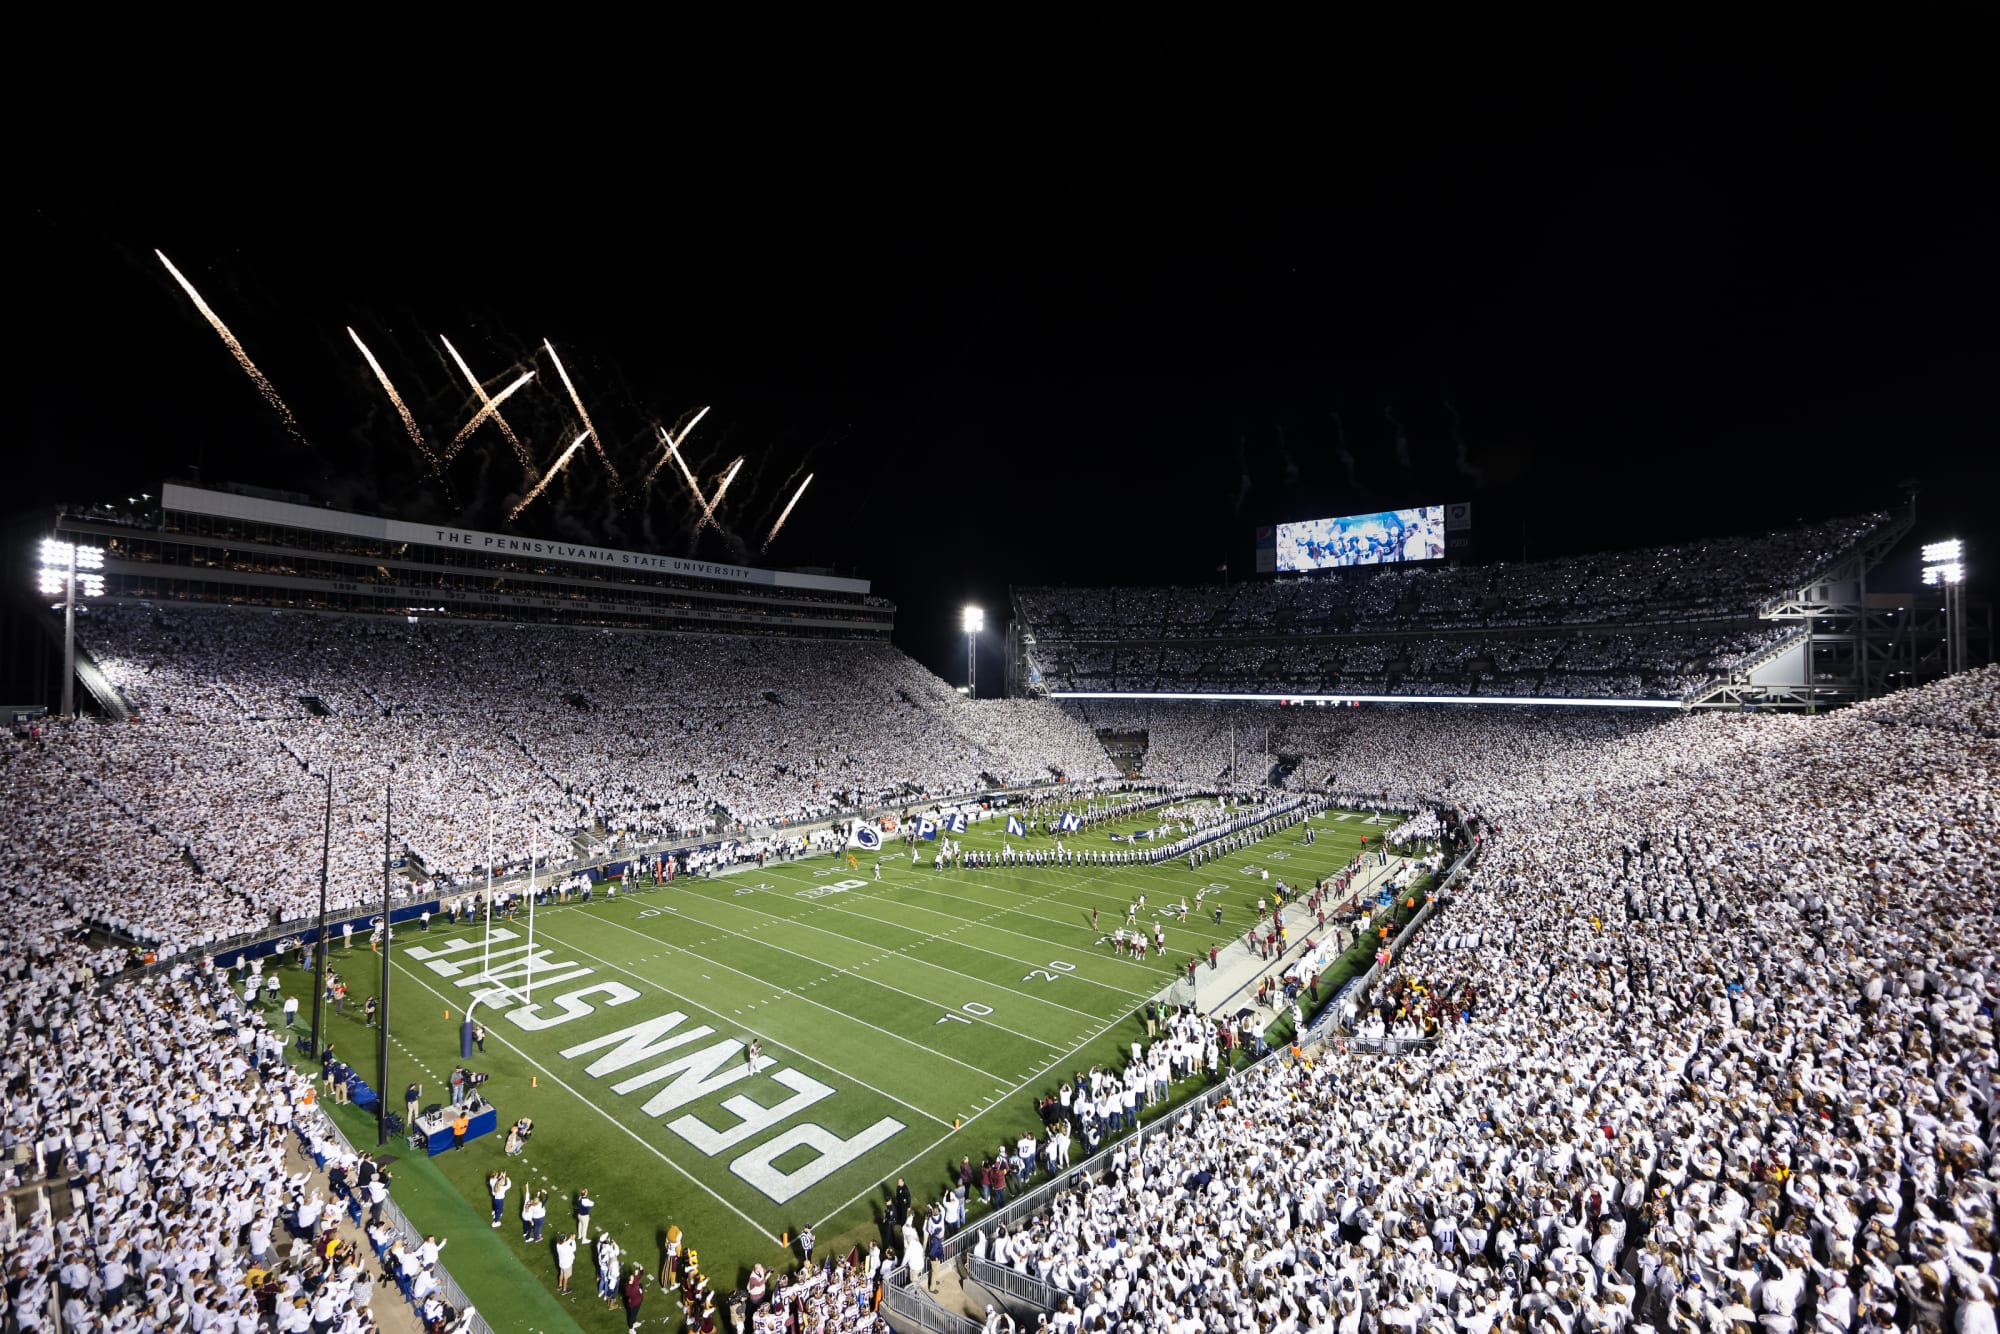 Penn State Football “Unrivaled” future schedules BVM Sports